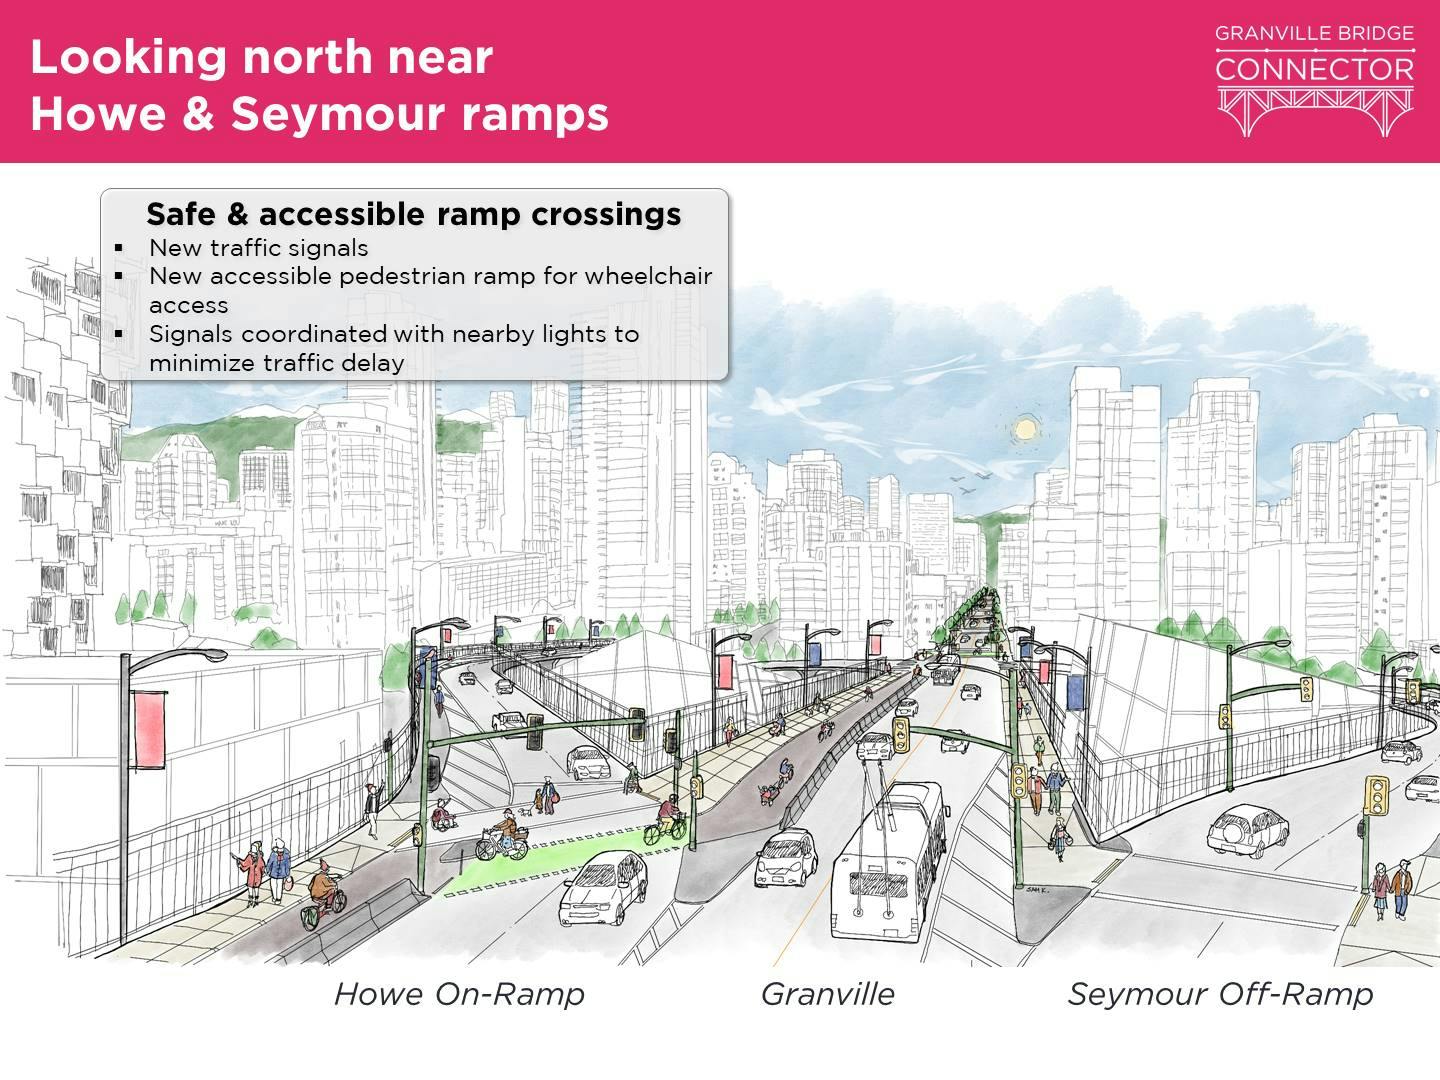 Artists rendition of the Granville Bridge looking north near Howe & Seymour ramps